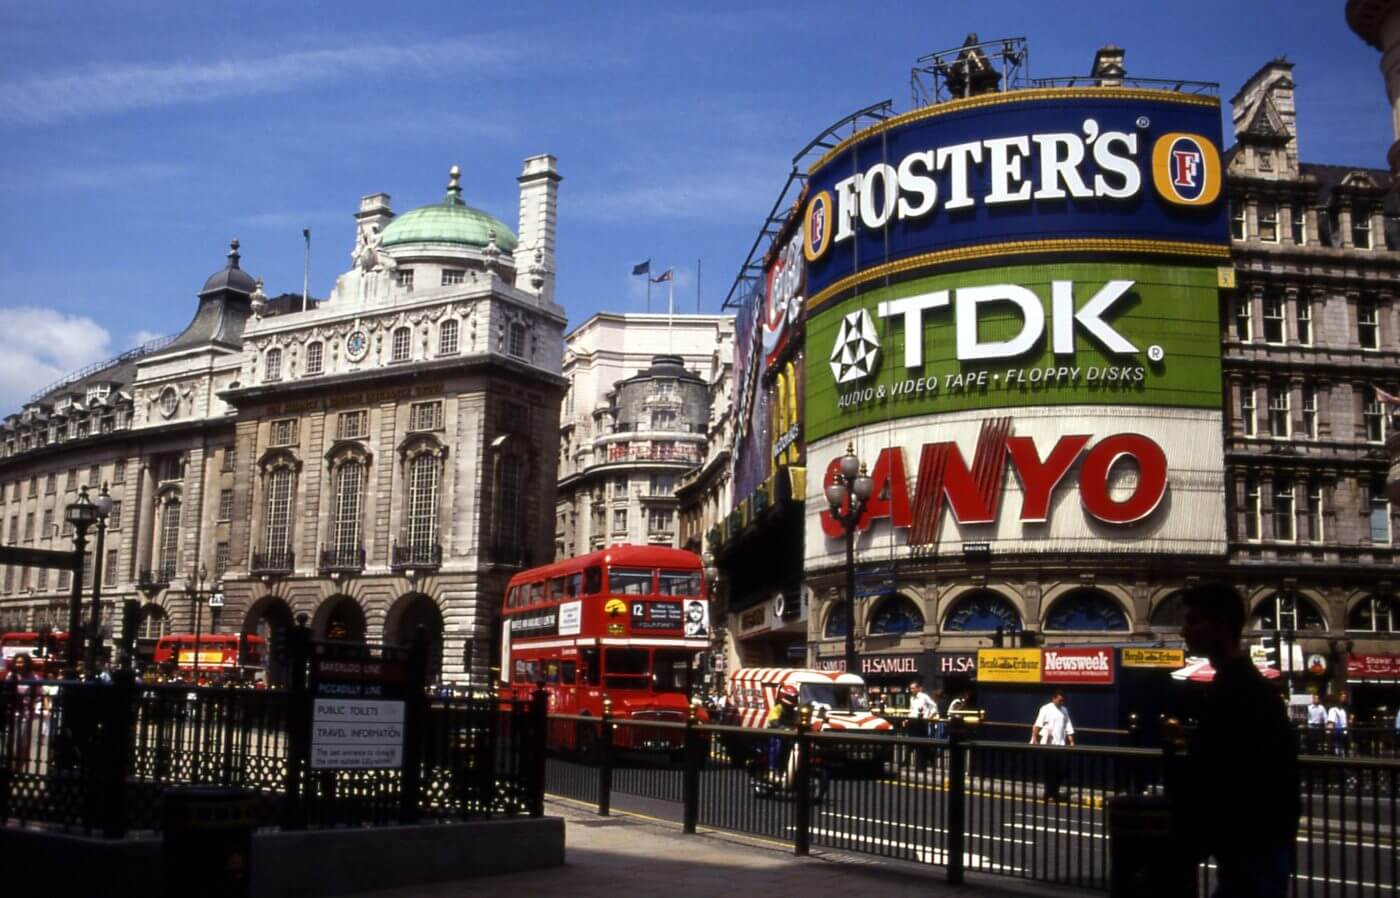 Piccadilly_circus_1992_07